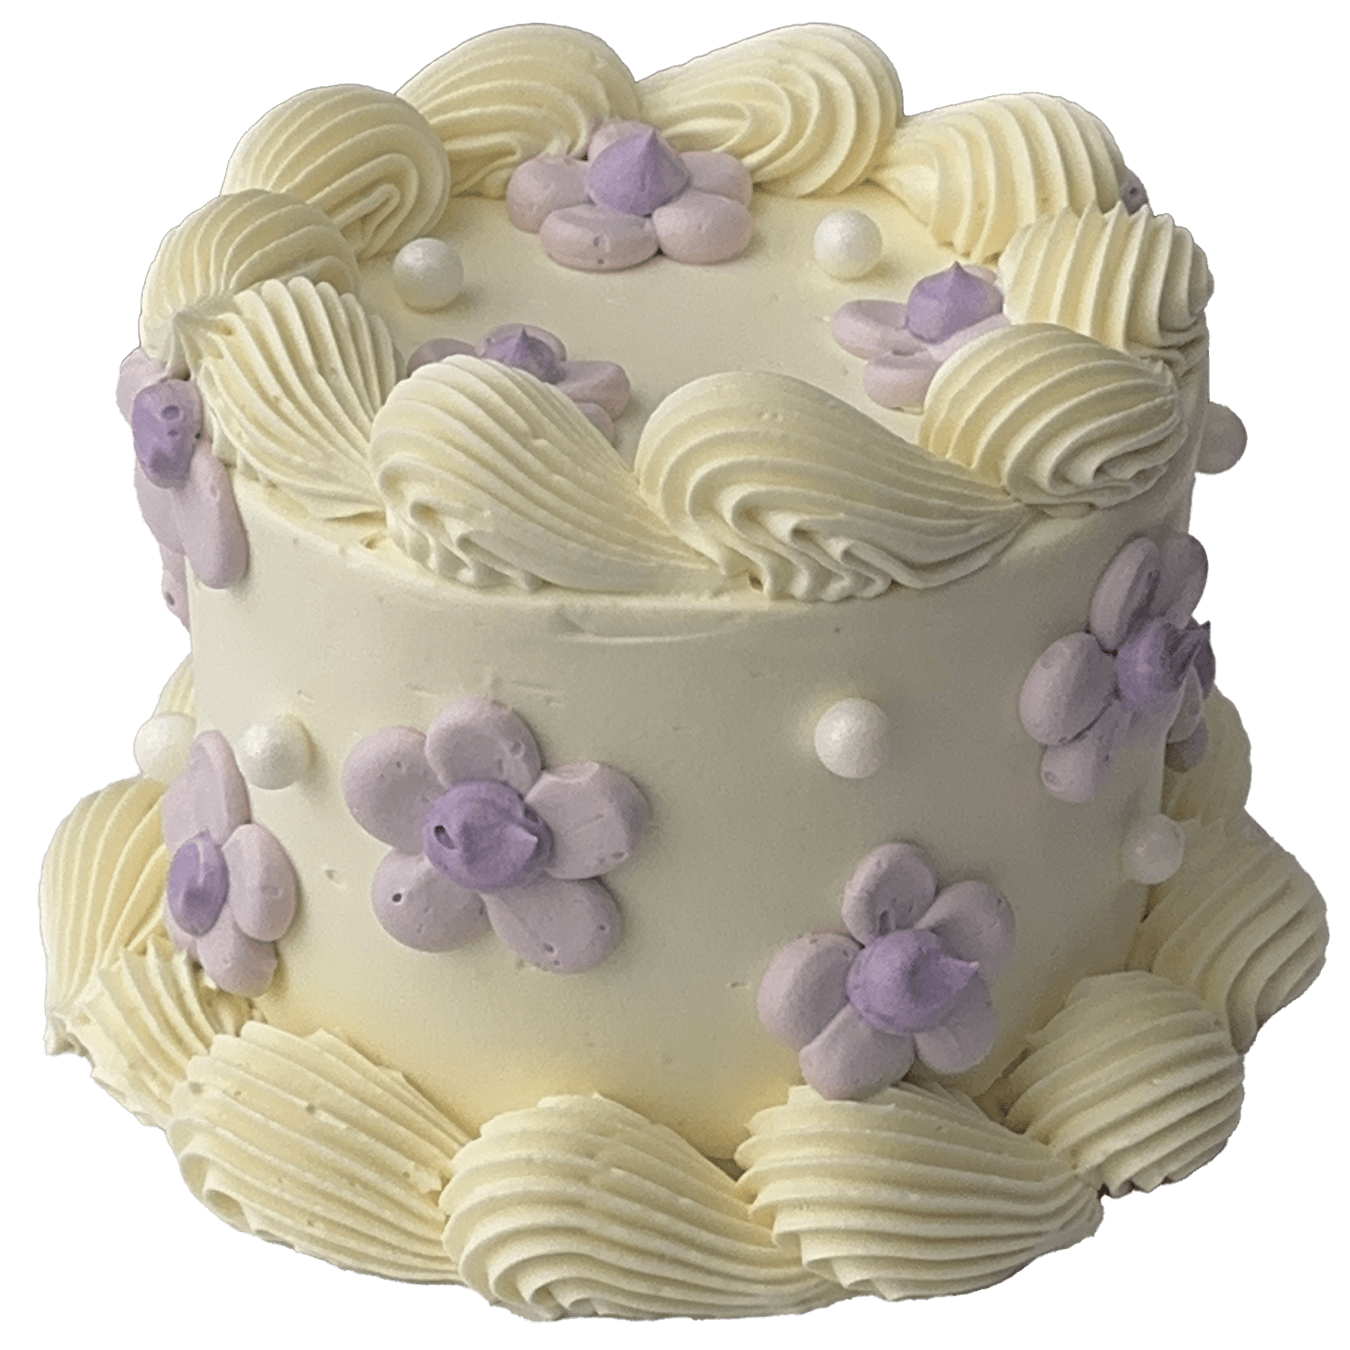  A small mini round shaped Swiss meringue buttercream cake with a white base colour and white piped shells.  Pretty purple daisies have been piped on the top and sides of the cake and some sugar pearls added to complete the decoration.